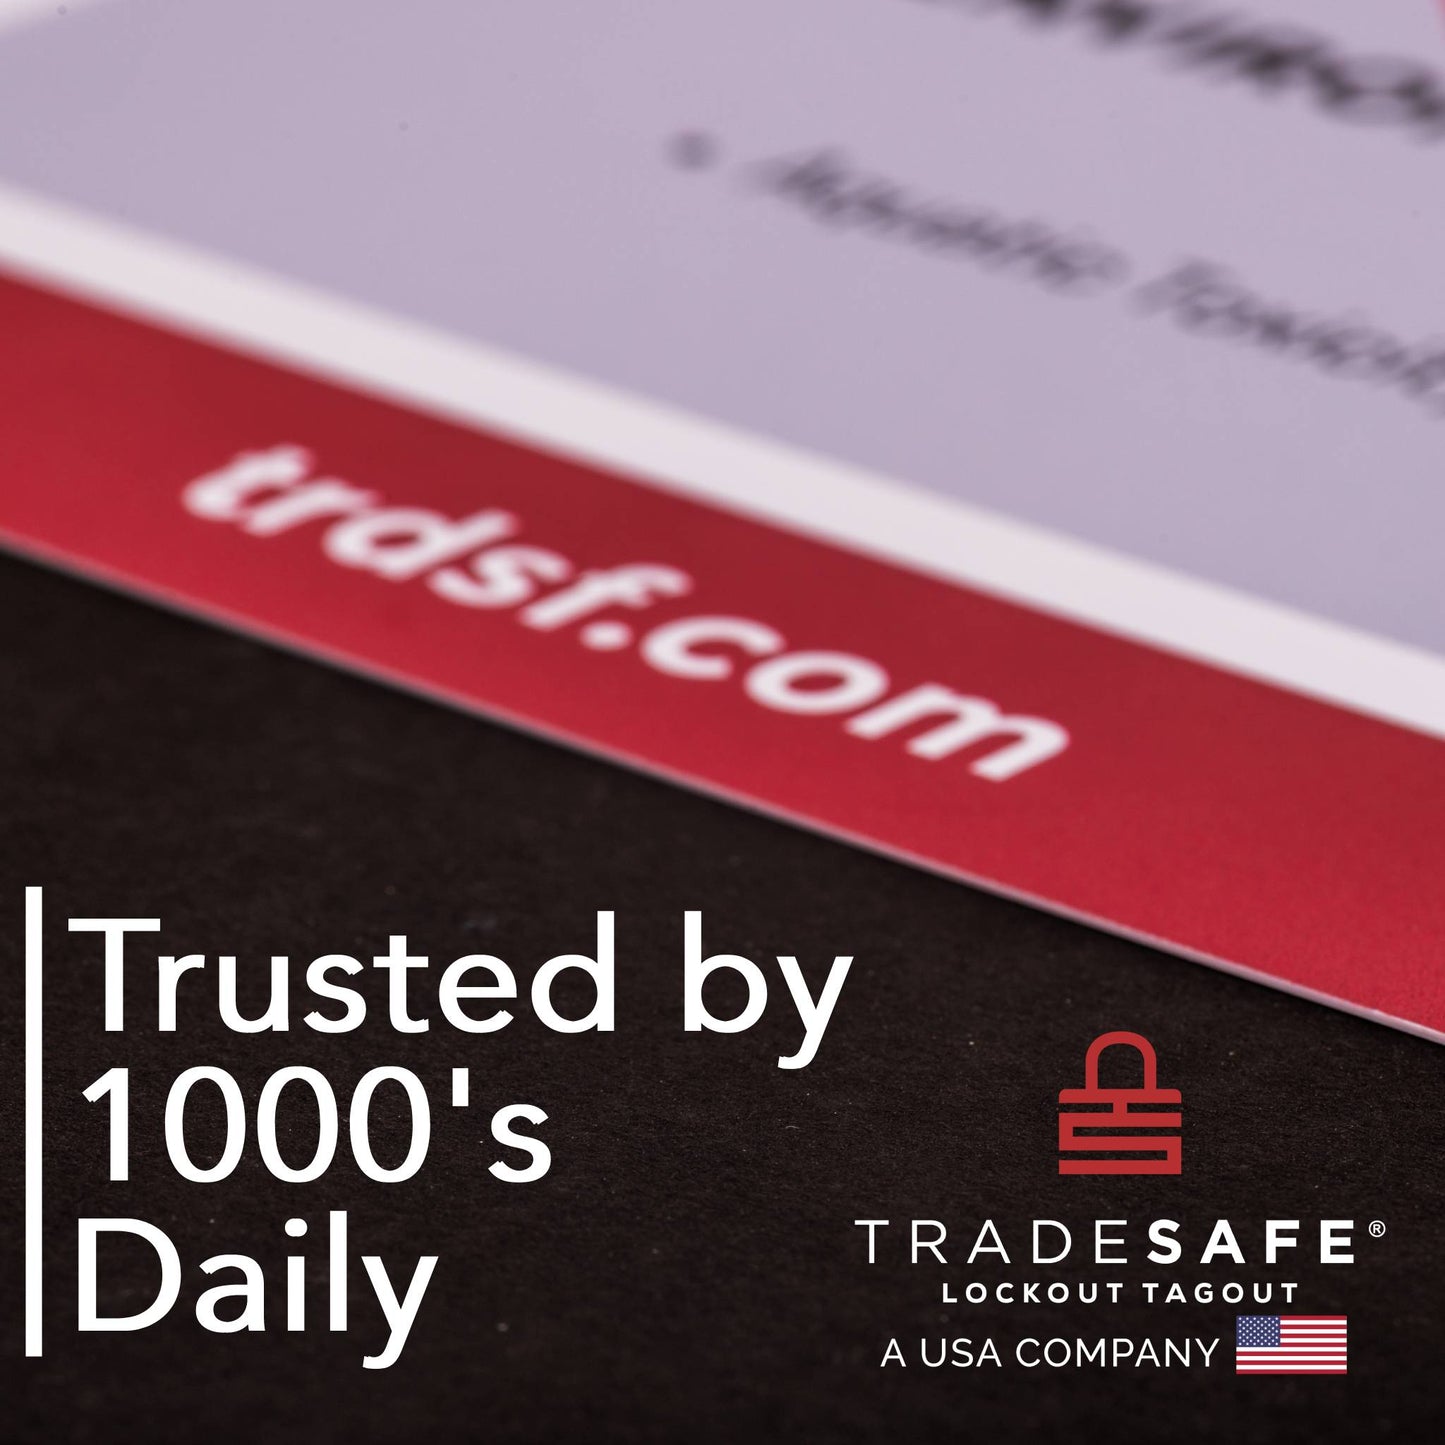 tradesafe branding image of ghs poster with text; trusted by 1000s daily